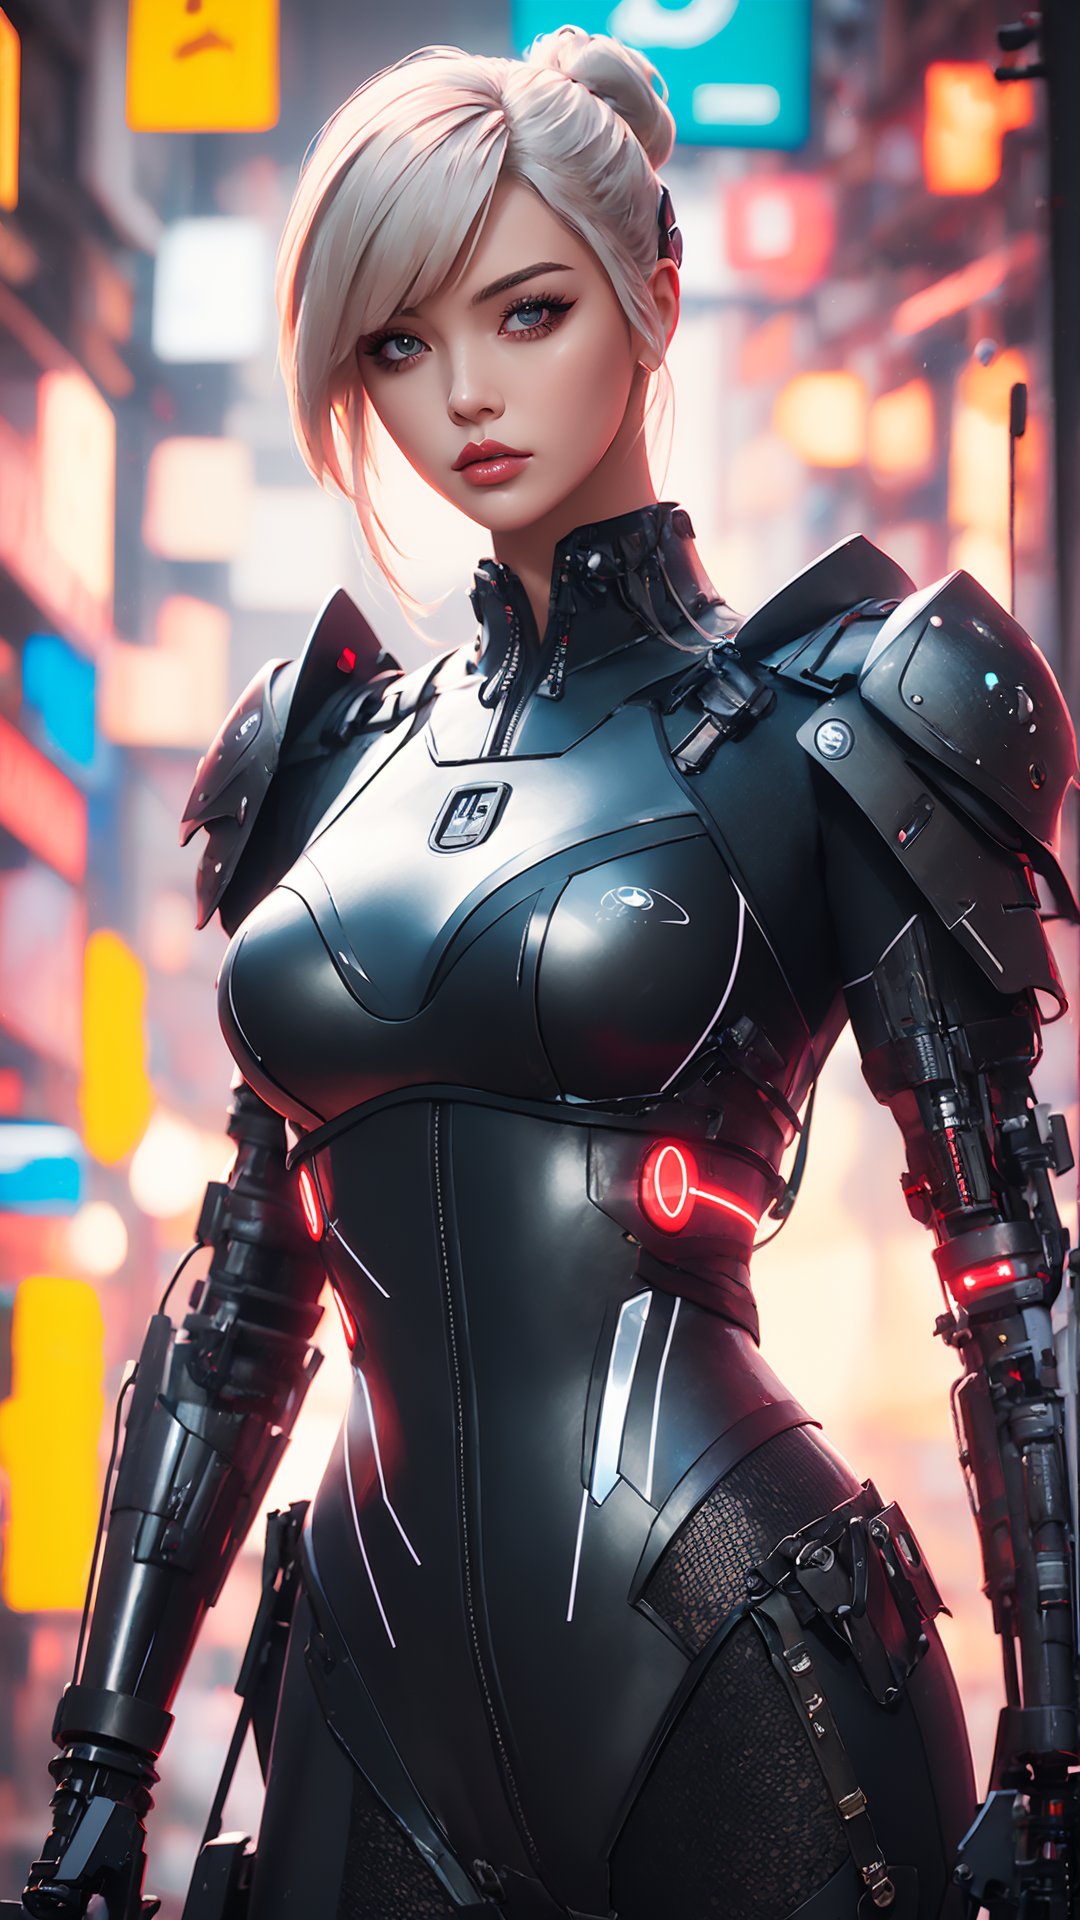 A young woman with steely eyes and a cybernetic eyepatch, clad in a high-tech, heavily armored cyberpunk bodysuit. The suit is adorned with weapons and gadgets, making her look like a walking arsenal. The pose is intimidating and focused, as she tracks her target through the neon-lit underbelly of the city, cyber_armor,photorealistic,cyber_armor